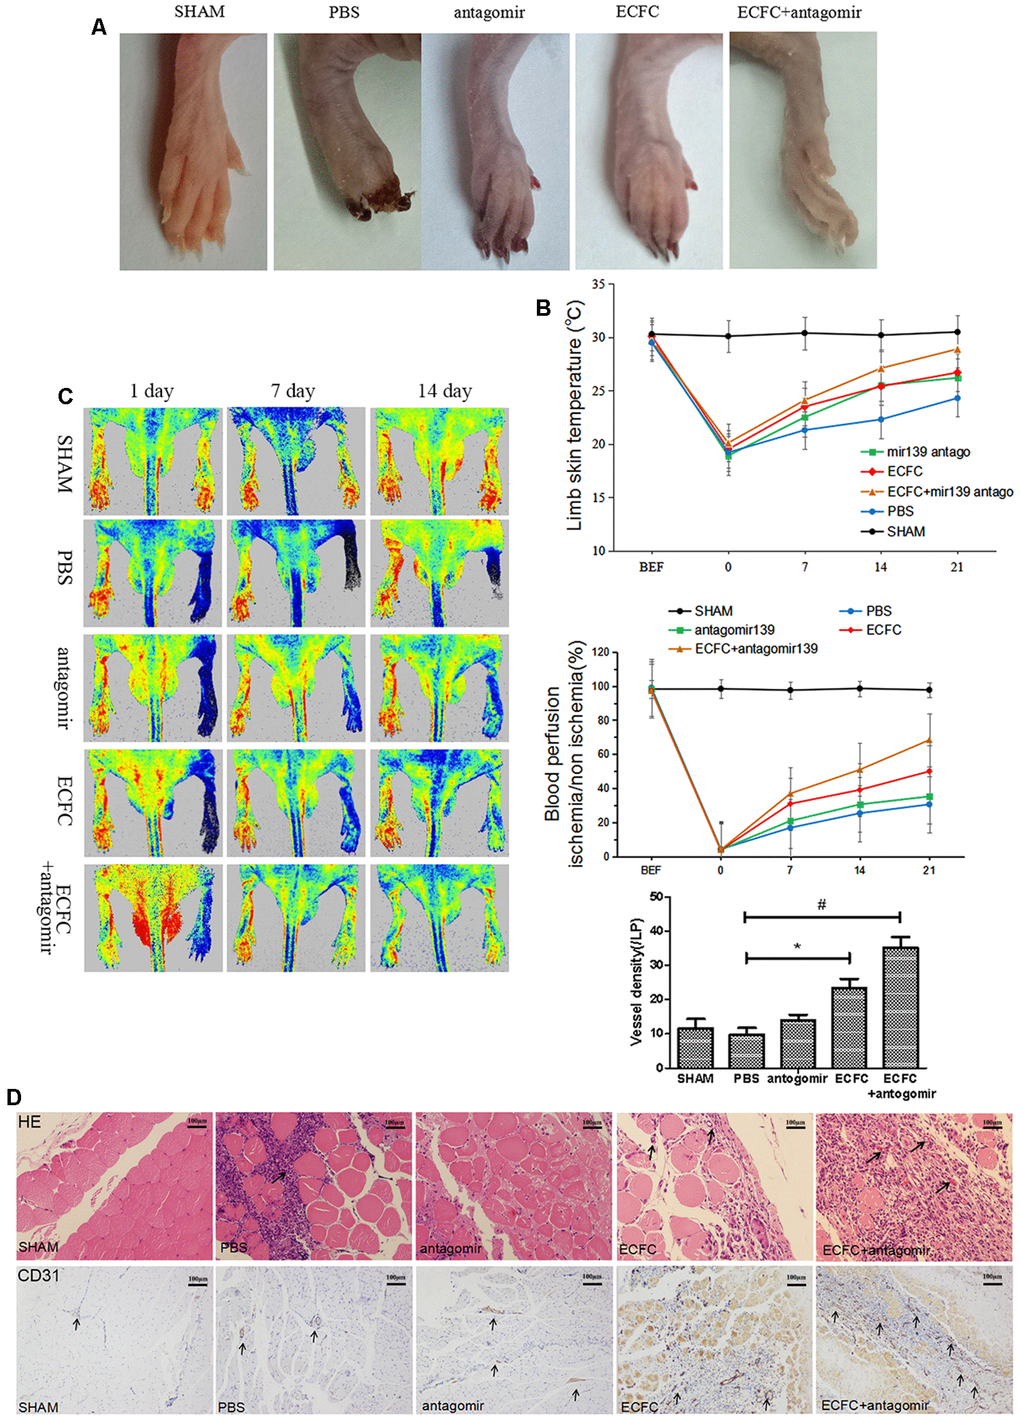 Downregulating miR-139-5p expression promotes ECFC-mediated angiogenesis and blood perfusion in hind limb ischemia (HLI) in diabetic mice. (A) Representative ischemia photographs of 5 groups taken 14 days after injections. Group A: Sham; Group B: PBS; Group C: antagomiR-139; Group D: ECFC; Group E: ECFCs + antagomiR-139. (B) Time-dependent effect of ECFC and/or antagomiR-139 treatment on skin temperature of lower extremity in ischemic mice. (N=3) *P#PC) Improved limb blood perfusion by transplanting ECFC and antagomir-139-5p in ischemic limb of diabetic mice. The time course of blood perfusion is shown in the images and quantitative analysis after HLI surgery with or without ECFC transplantation and/or antagomir-139-5p. Blood perfusion is the ratio of ischemic to non-ischemic limb perfusion measured by a PeriCam Perfusion Speckle Imager. (N=3) *P#PD) Effect of ECFC transplantation and/or antagomiR-139 on vascular density of lower extremity in ischemic mice. Vascular density was determined by counting the number of CD31-stained blood vessels (brown, black arrow) under 5 high-power fields (200X) of normal optical microscope. (N=3) *P#P